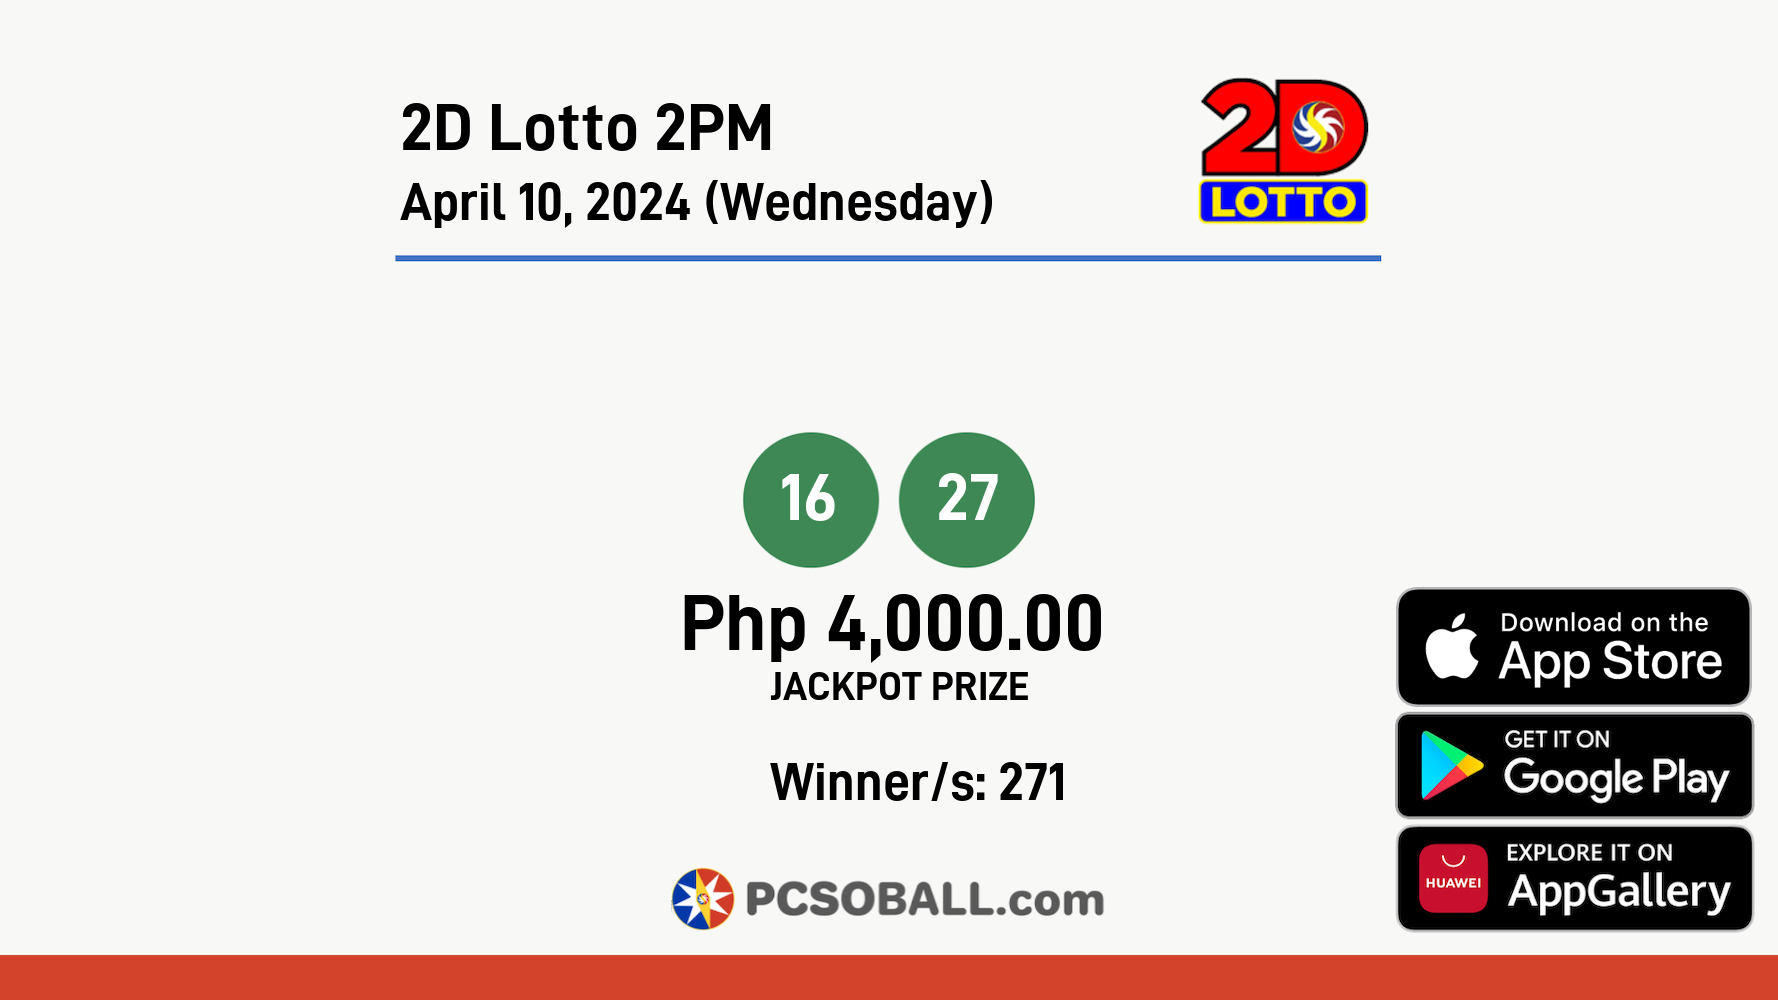 2D Lotto 2PM April 10, 2024 (Wednesday) Result